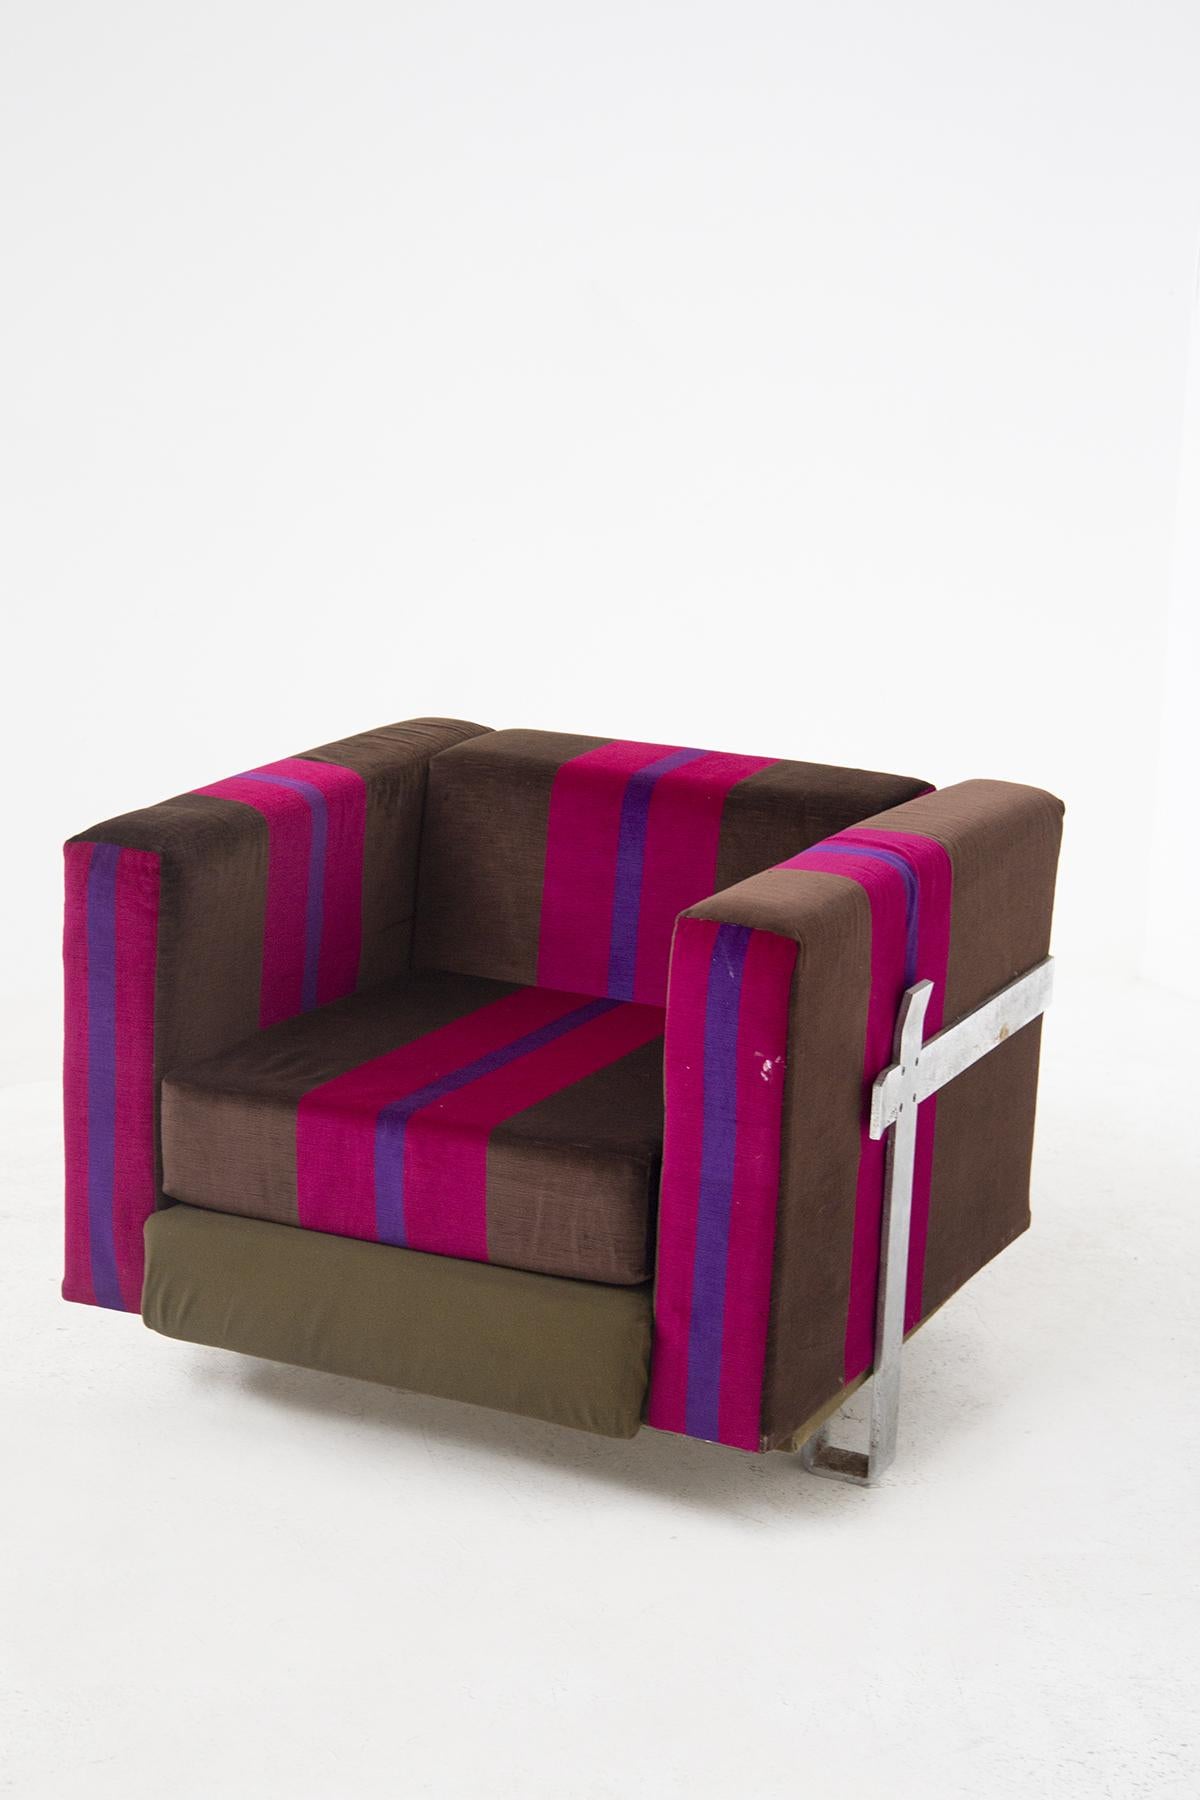 Splendid set of 2 fabric armchairs designed by Luigi Caccia Dominioni for the prestigious manufacture Azucena Italia.
The vintage armchairs are made of brown, fuchsia and purple striped fabric, which creates a very colorful geometric effect. The